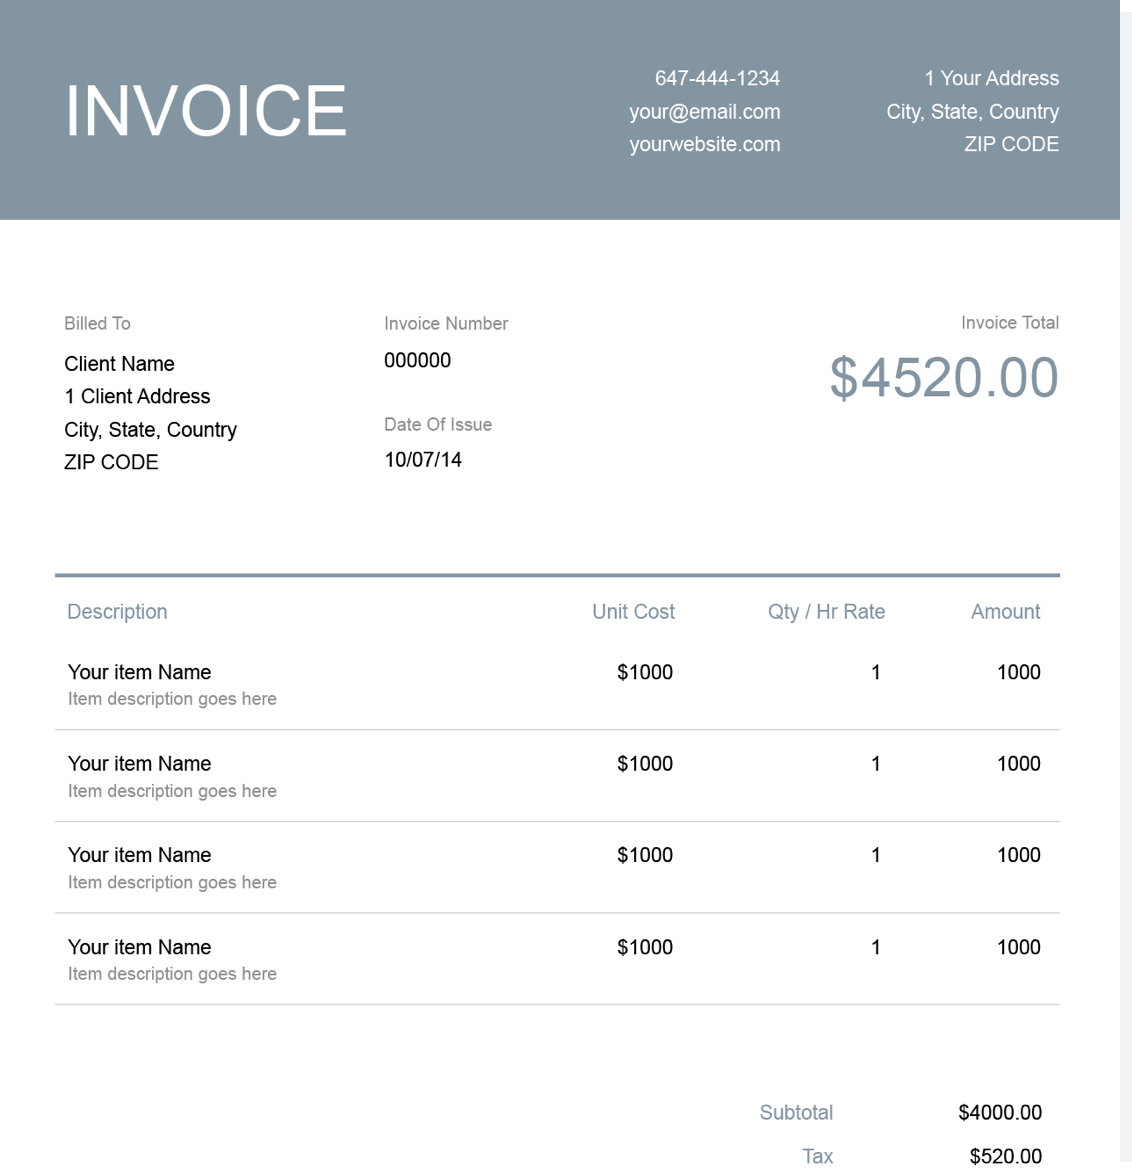 Example of a sales invoice